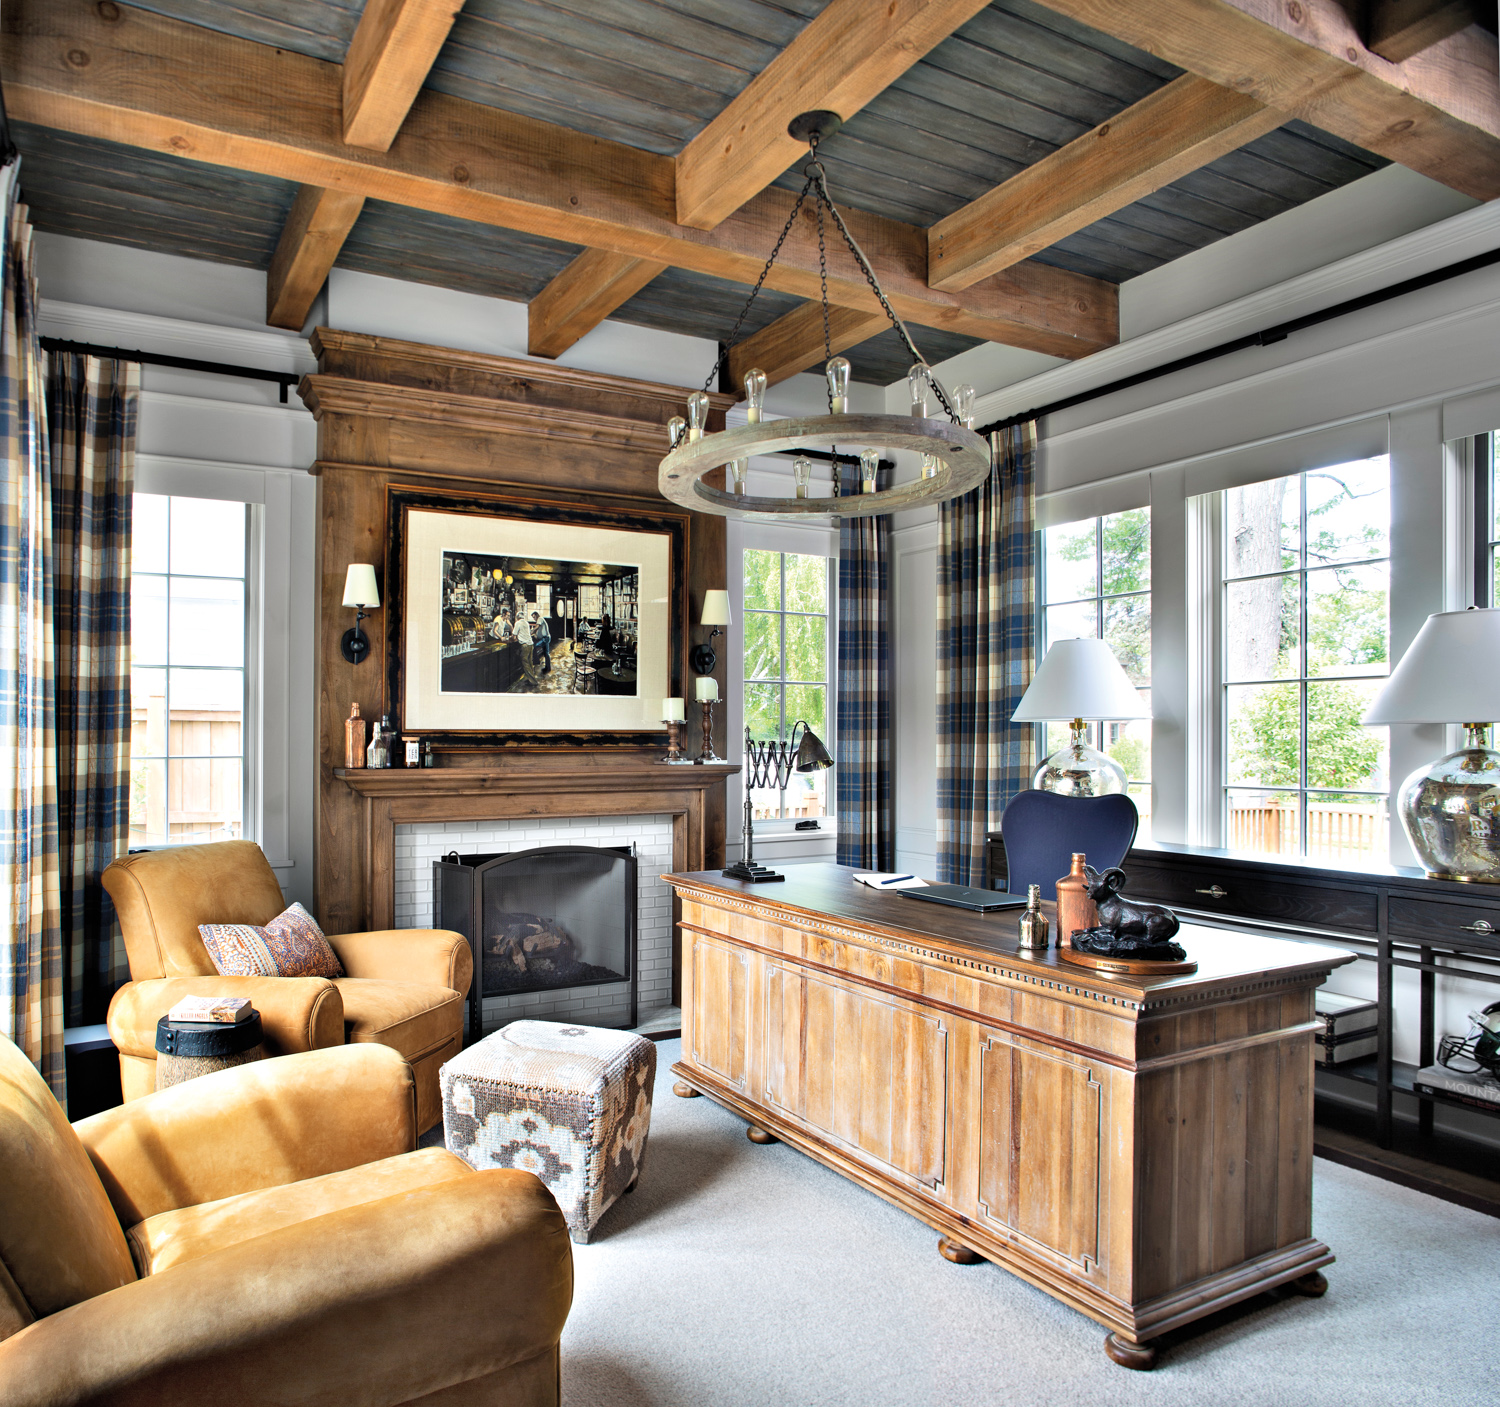 office with exposed ceiling beams, desk and armchairs, with plaid curtains and wood surround fireplace